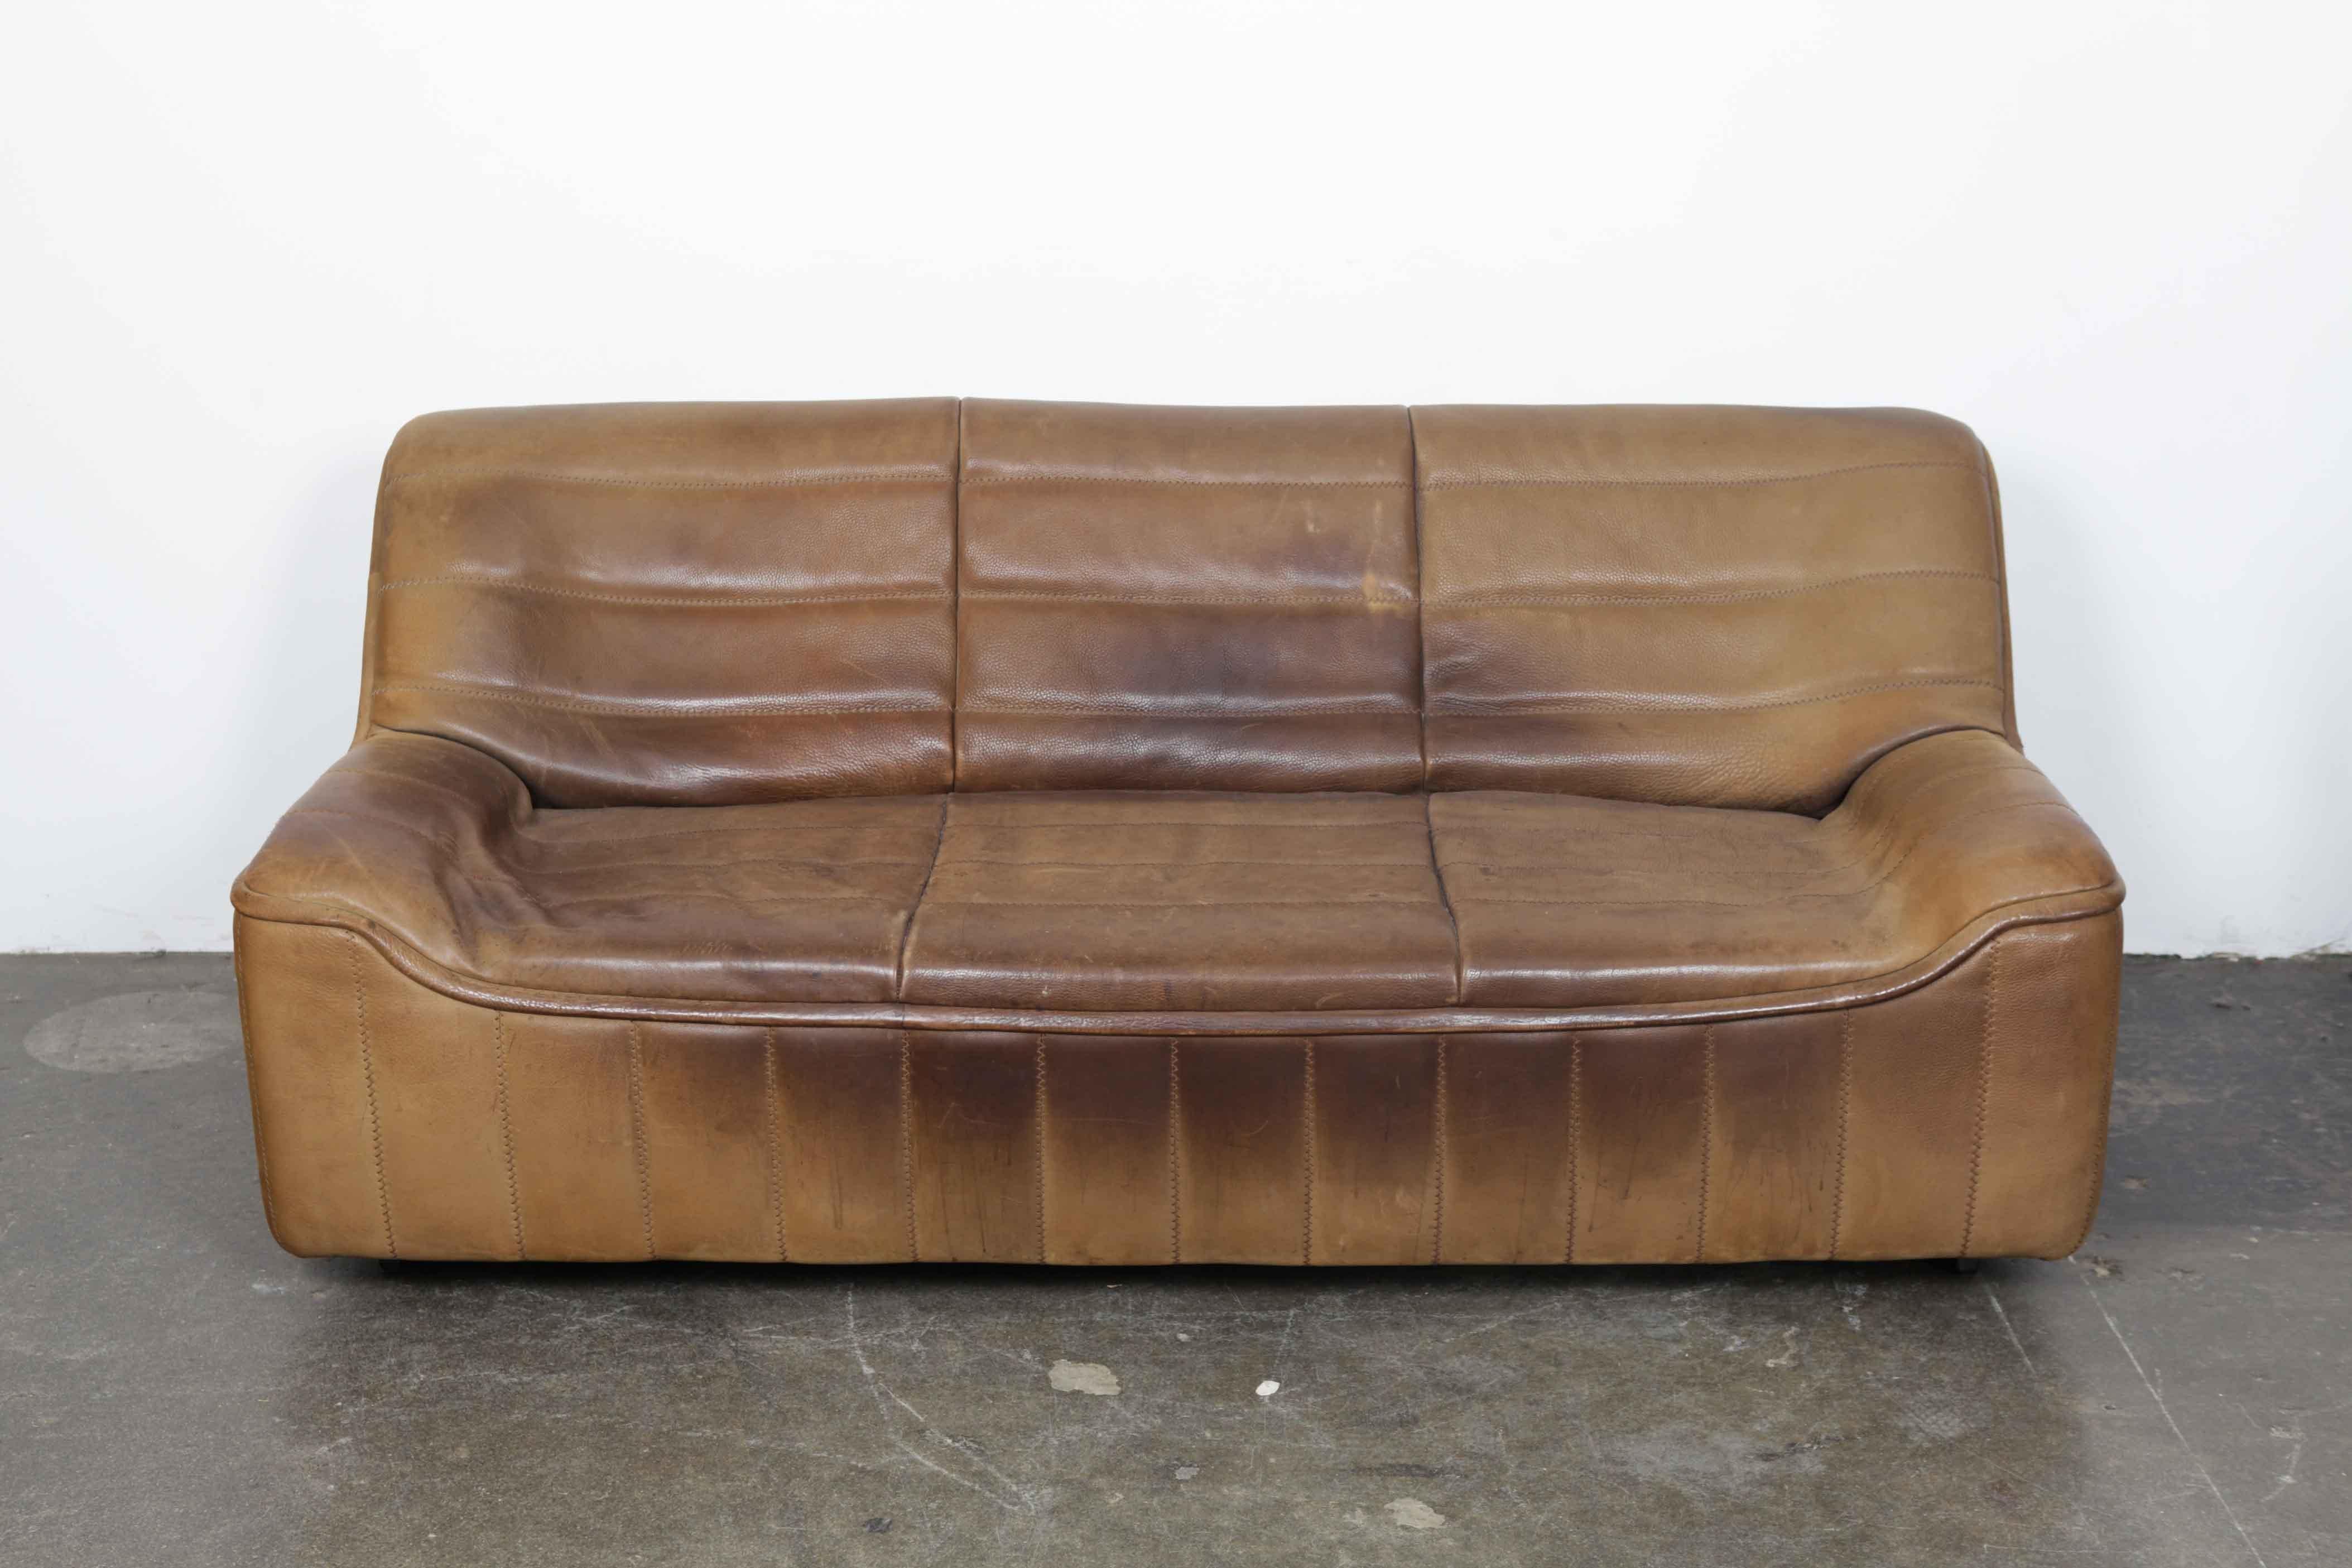 Brown leather three-seat sofa made by De Sede, Switzerland, model DS 84, with original buffalo leather that has vintage wear and patina as seen in the photos.